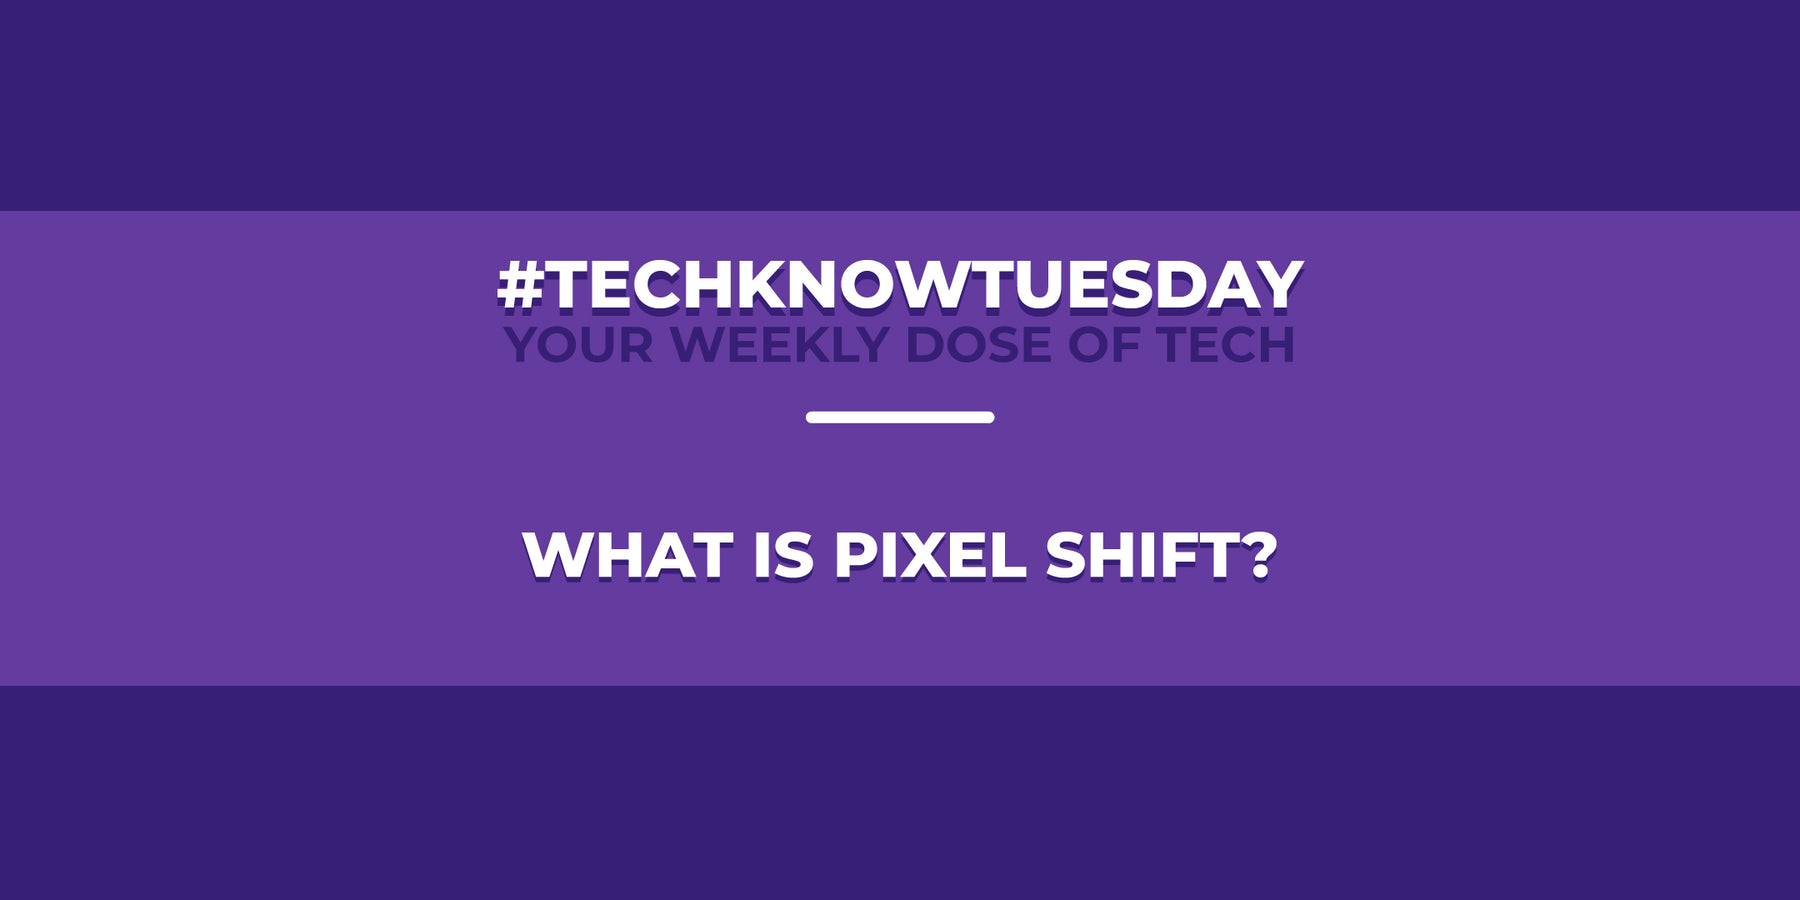 What is Pixel Shift?